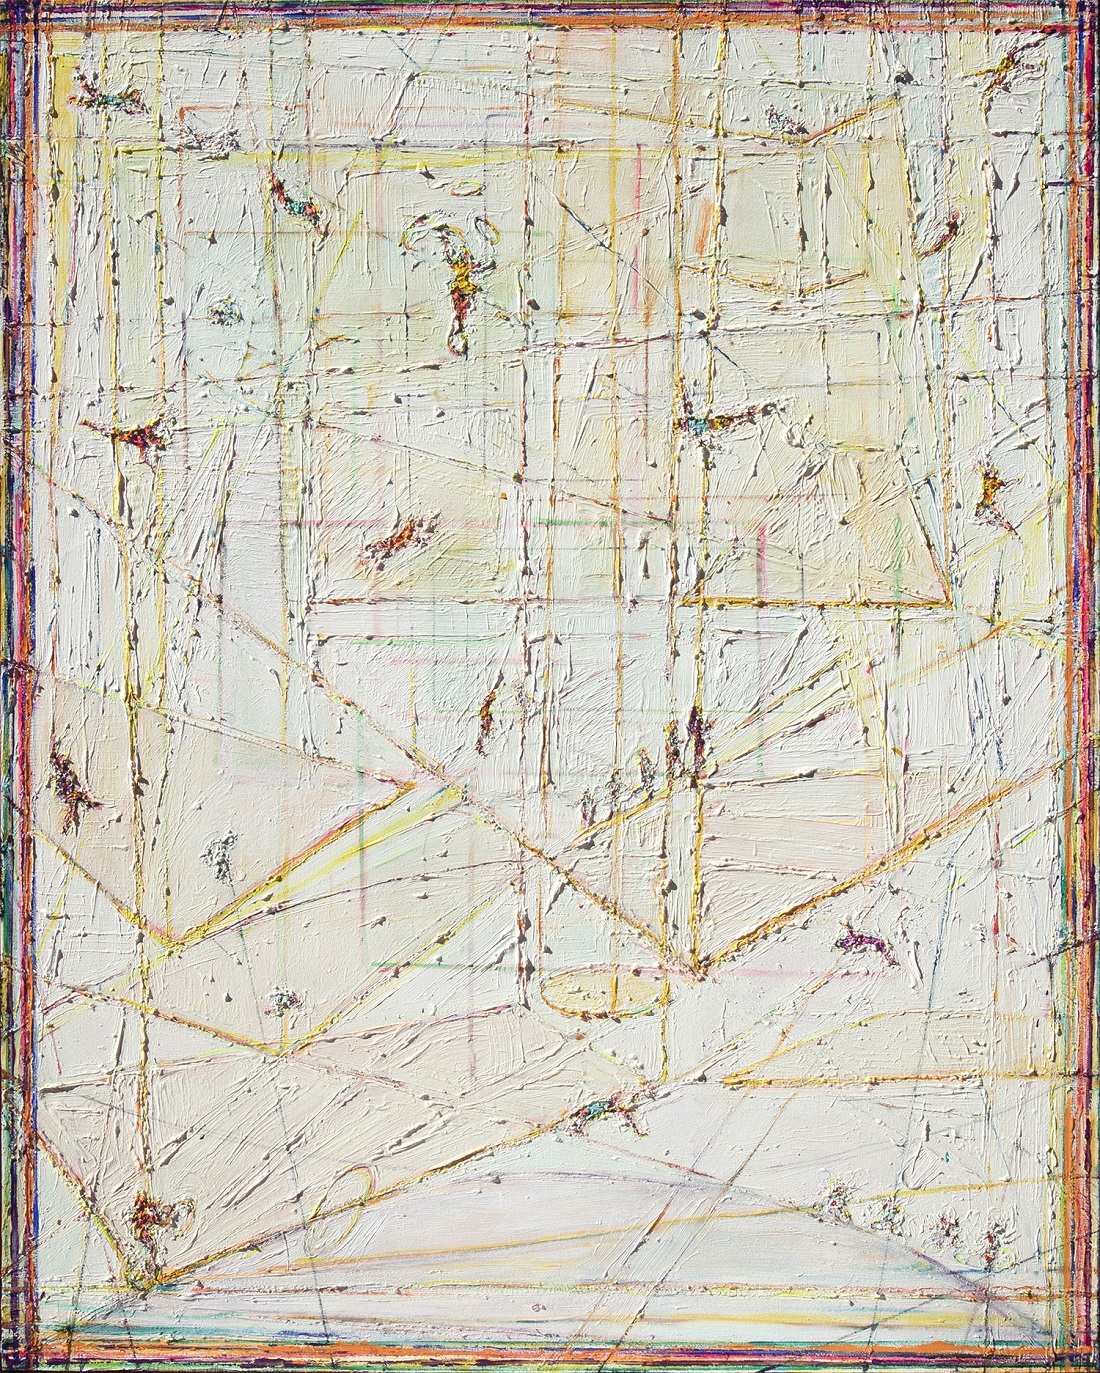 
		                					Clay Vorhes		                																	
																											<i>Trapeze #28,</i>  
																																								2014/2018/2019, 
																																								oil on canvas, 
																																								60 x 48 inches 
																								
		                				